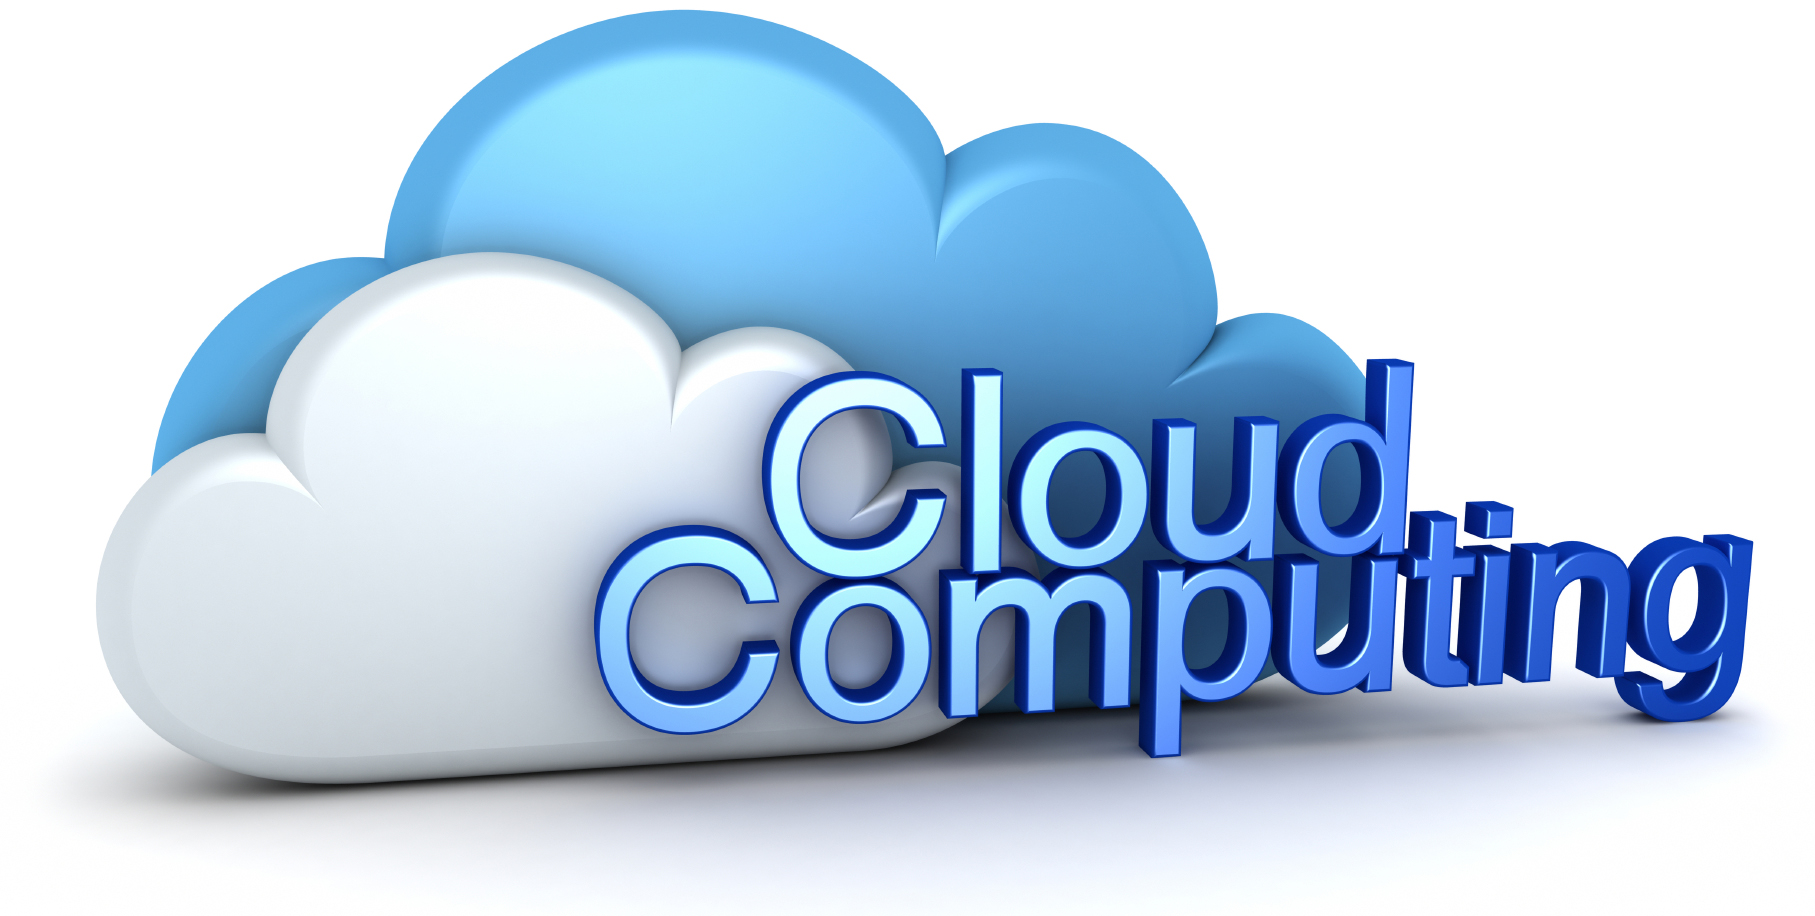 9 Cloud Computing Graphic Images